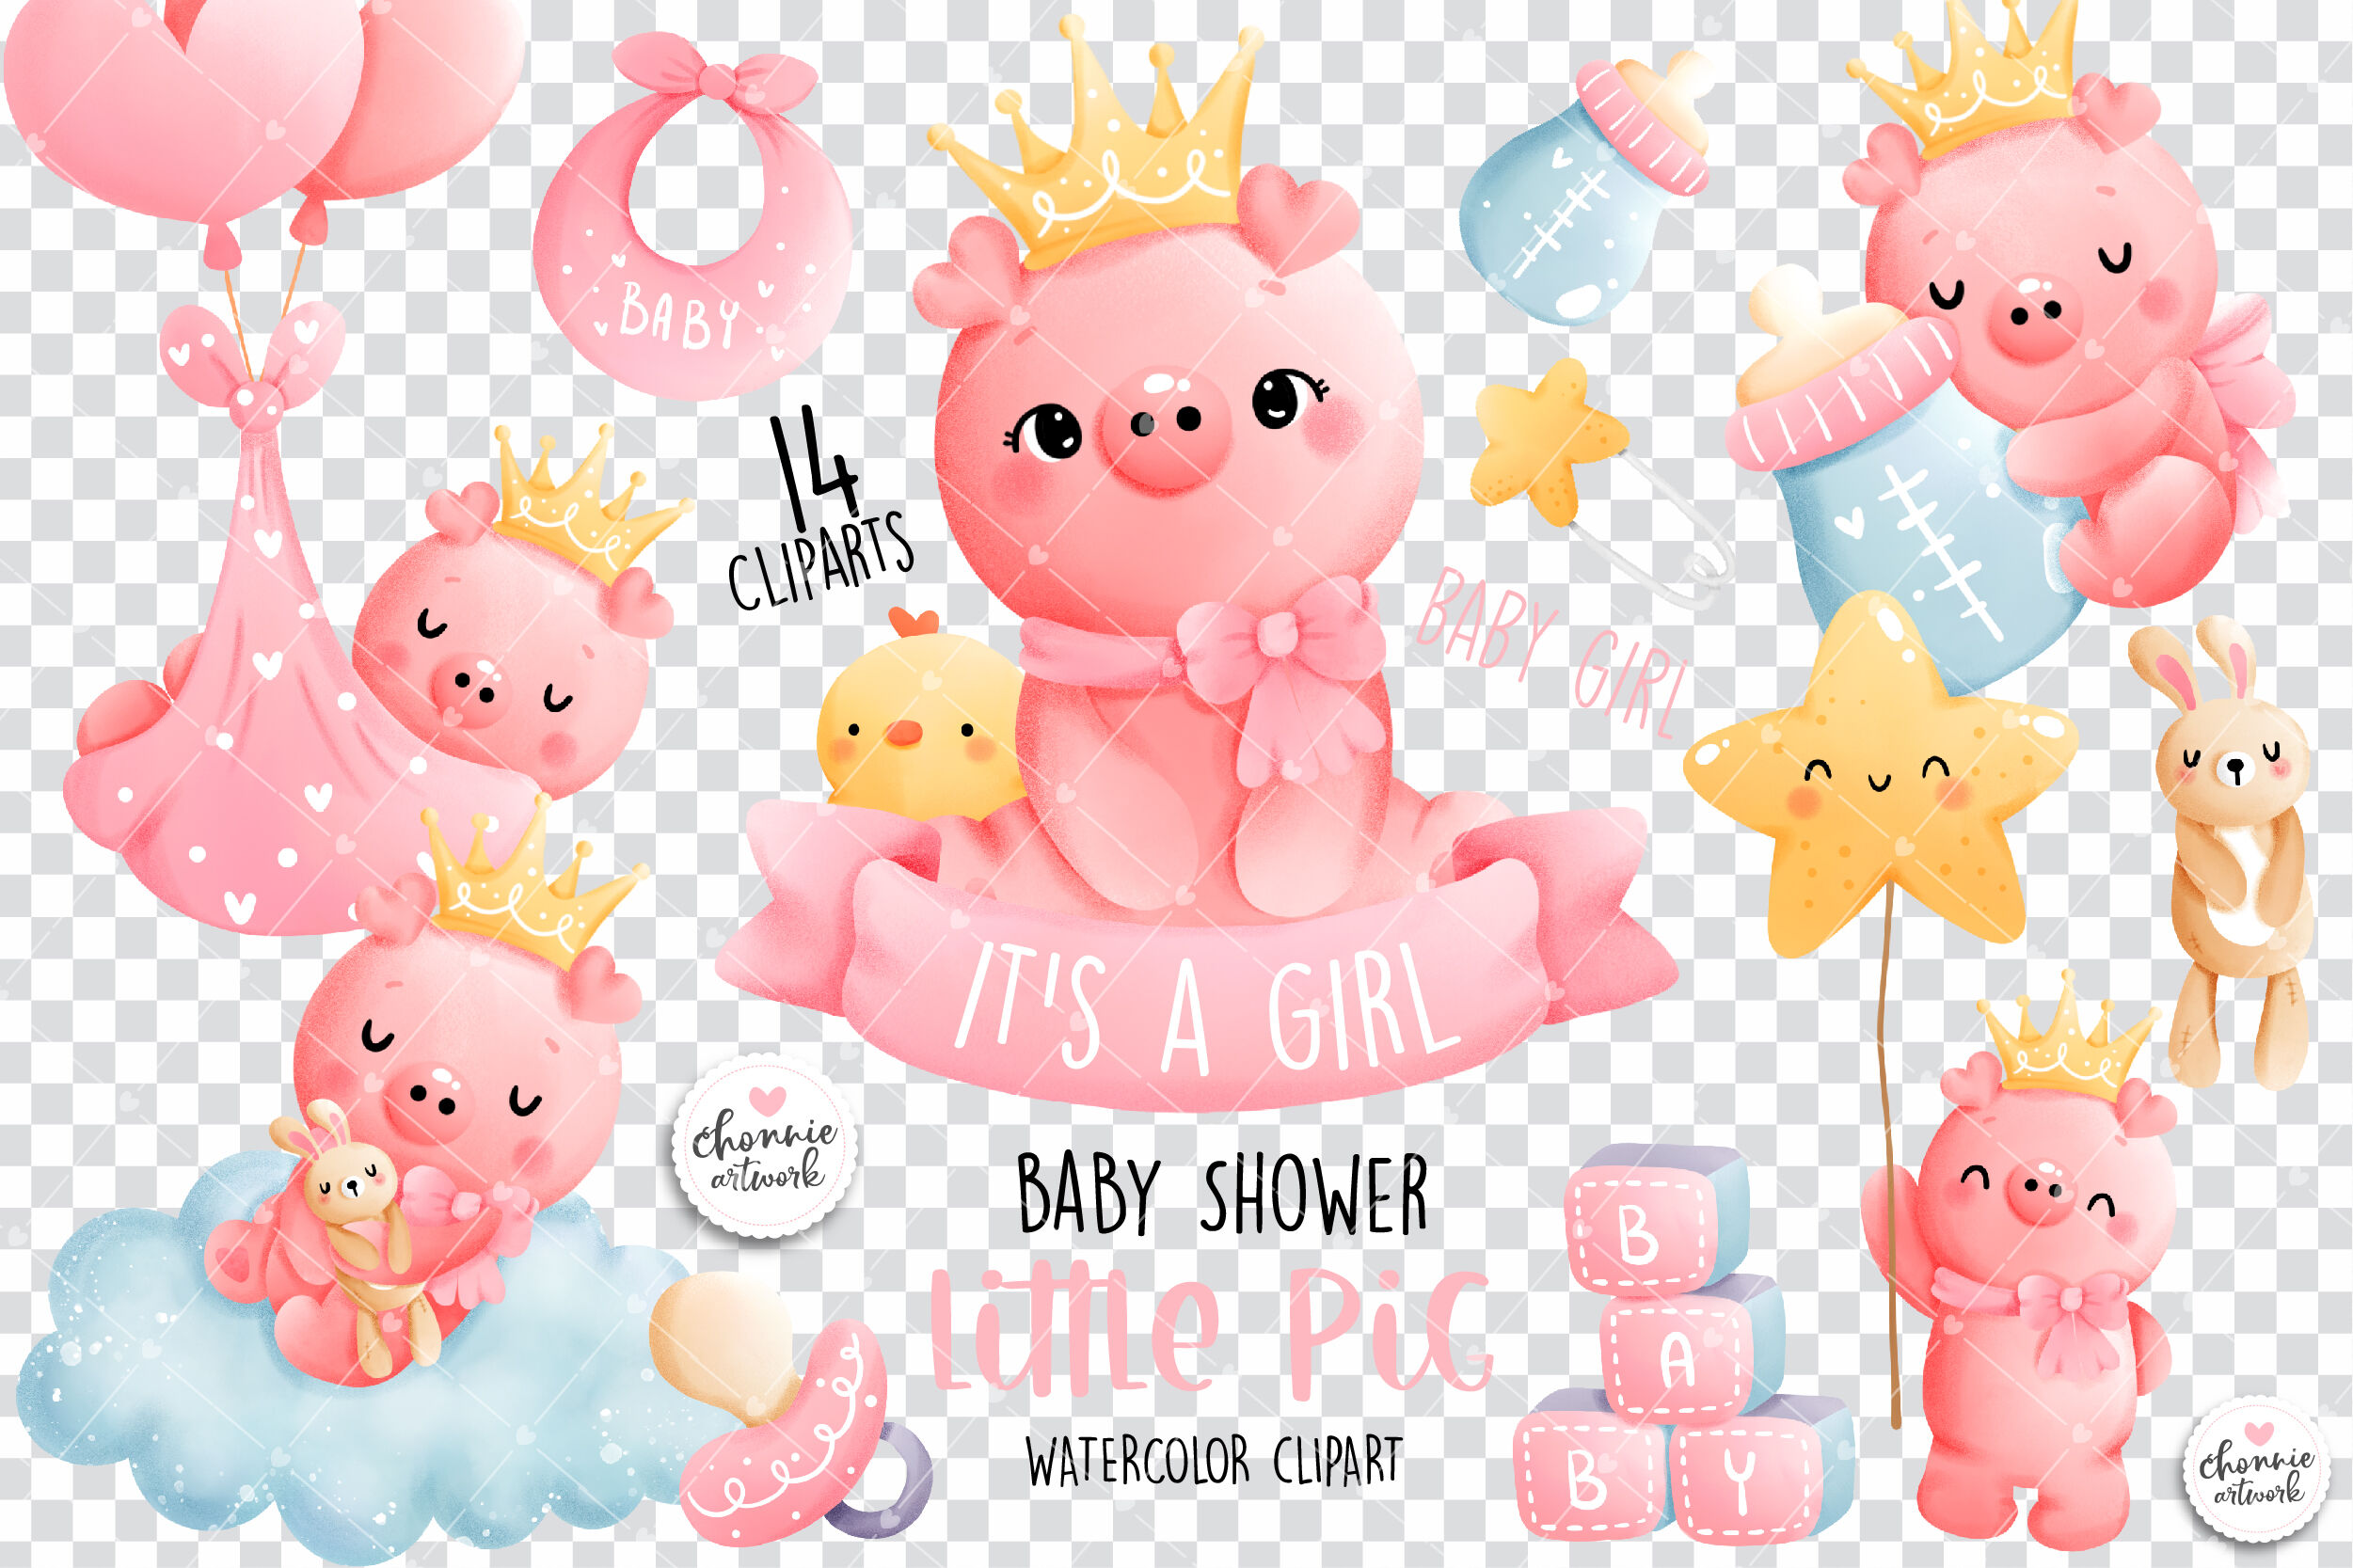 baby pig clipart